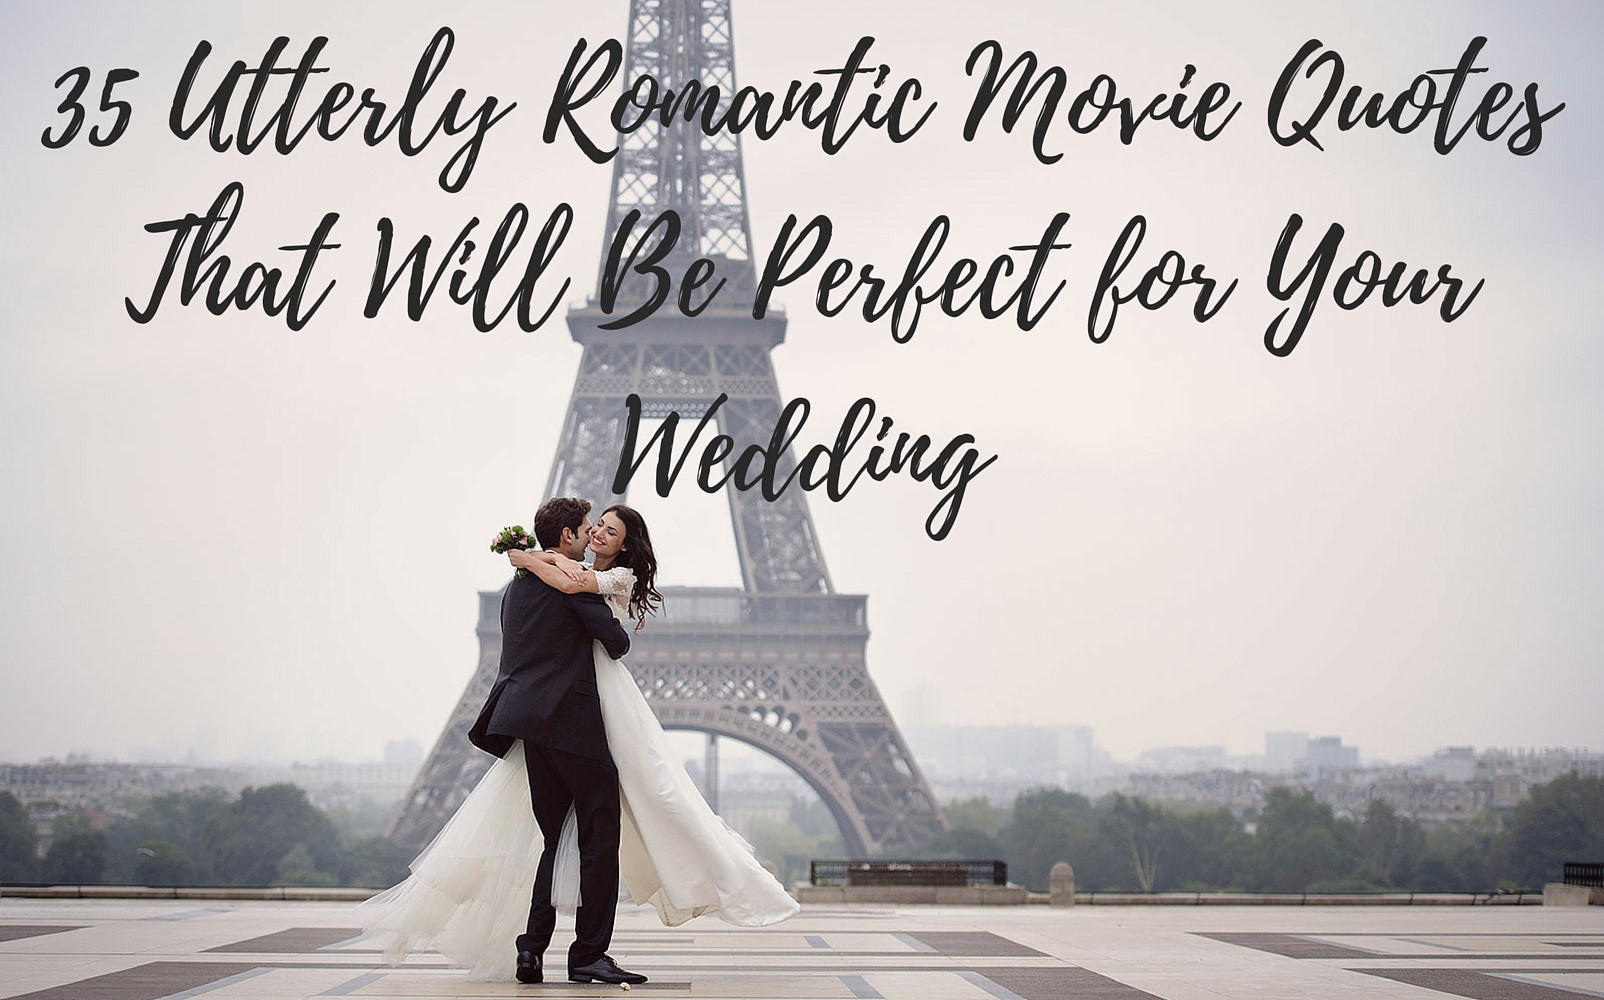 Quotes From Romantic Movies
 Utterly Romantic Quotes from Movies